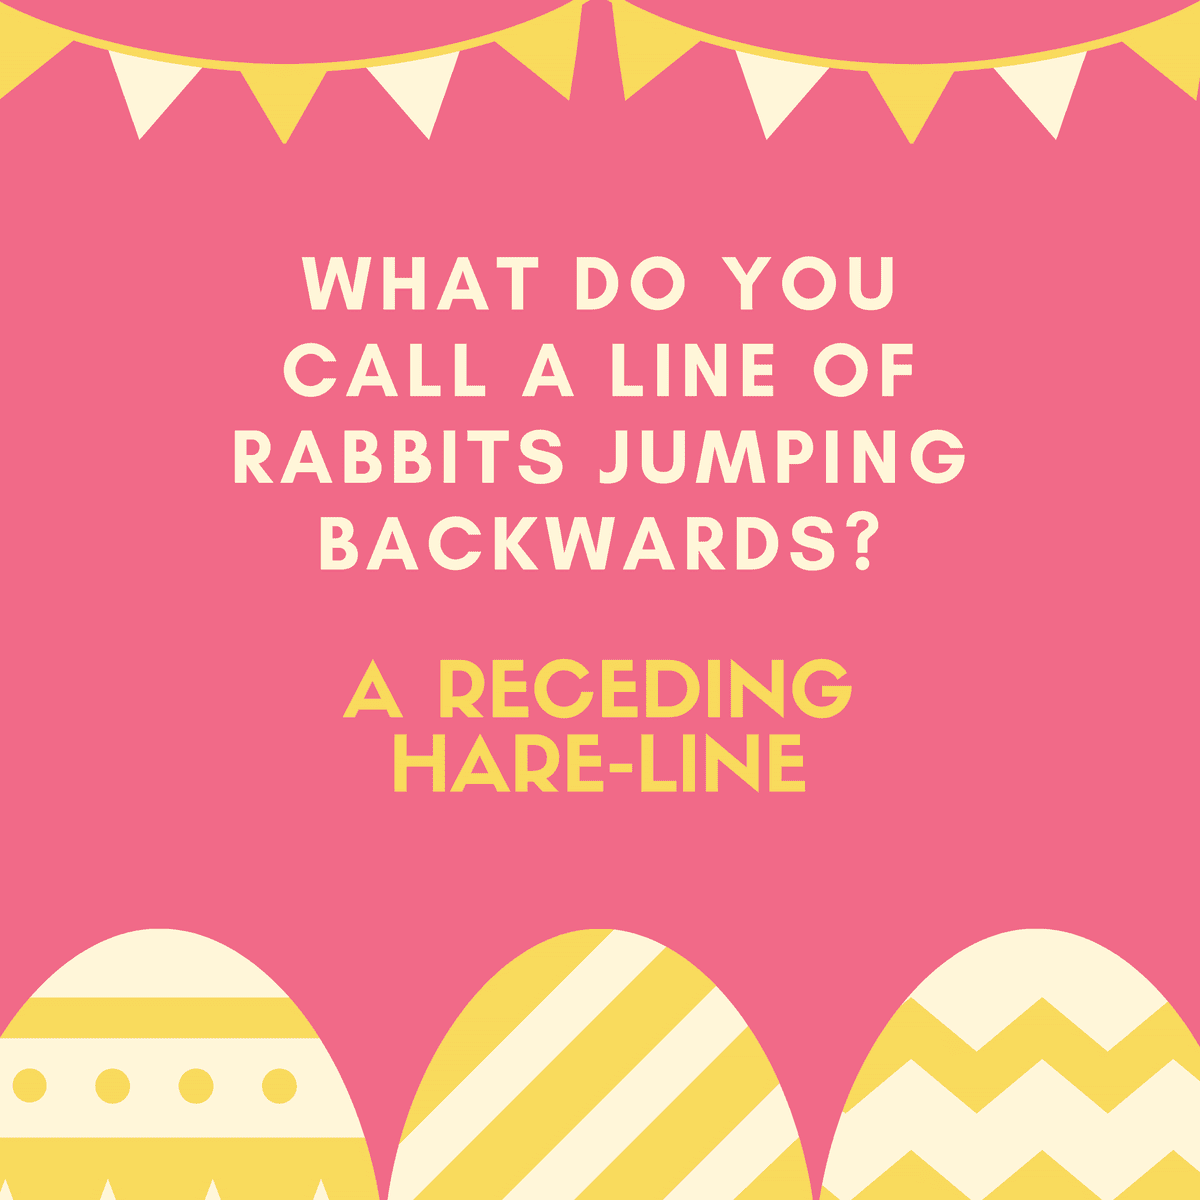 What do you call a line of rabbits jumping backwards? A receding hare-line